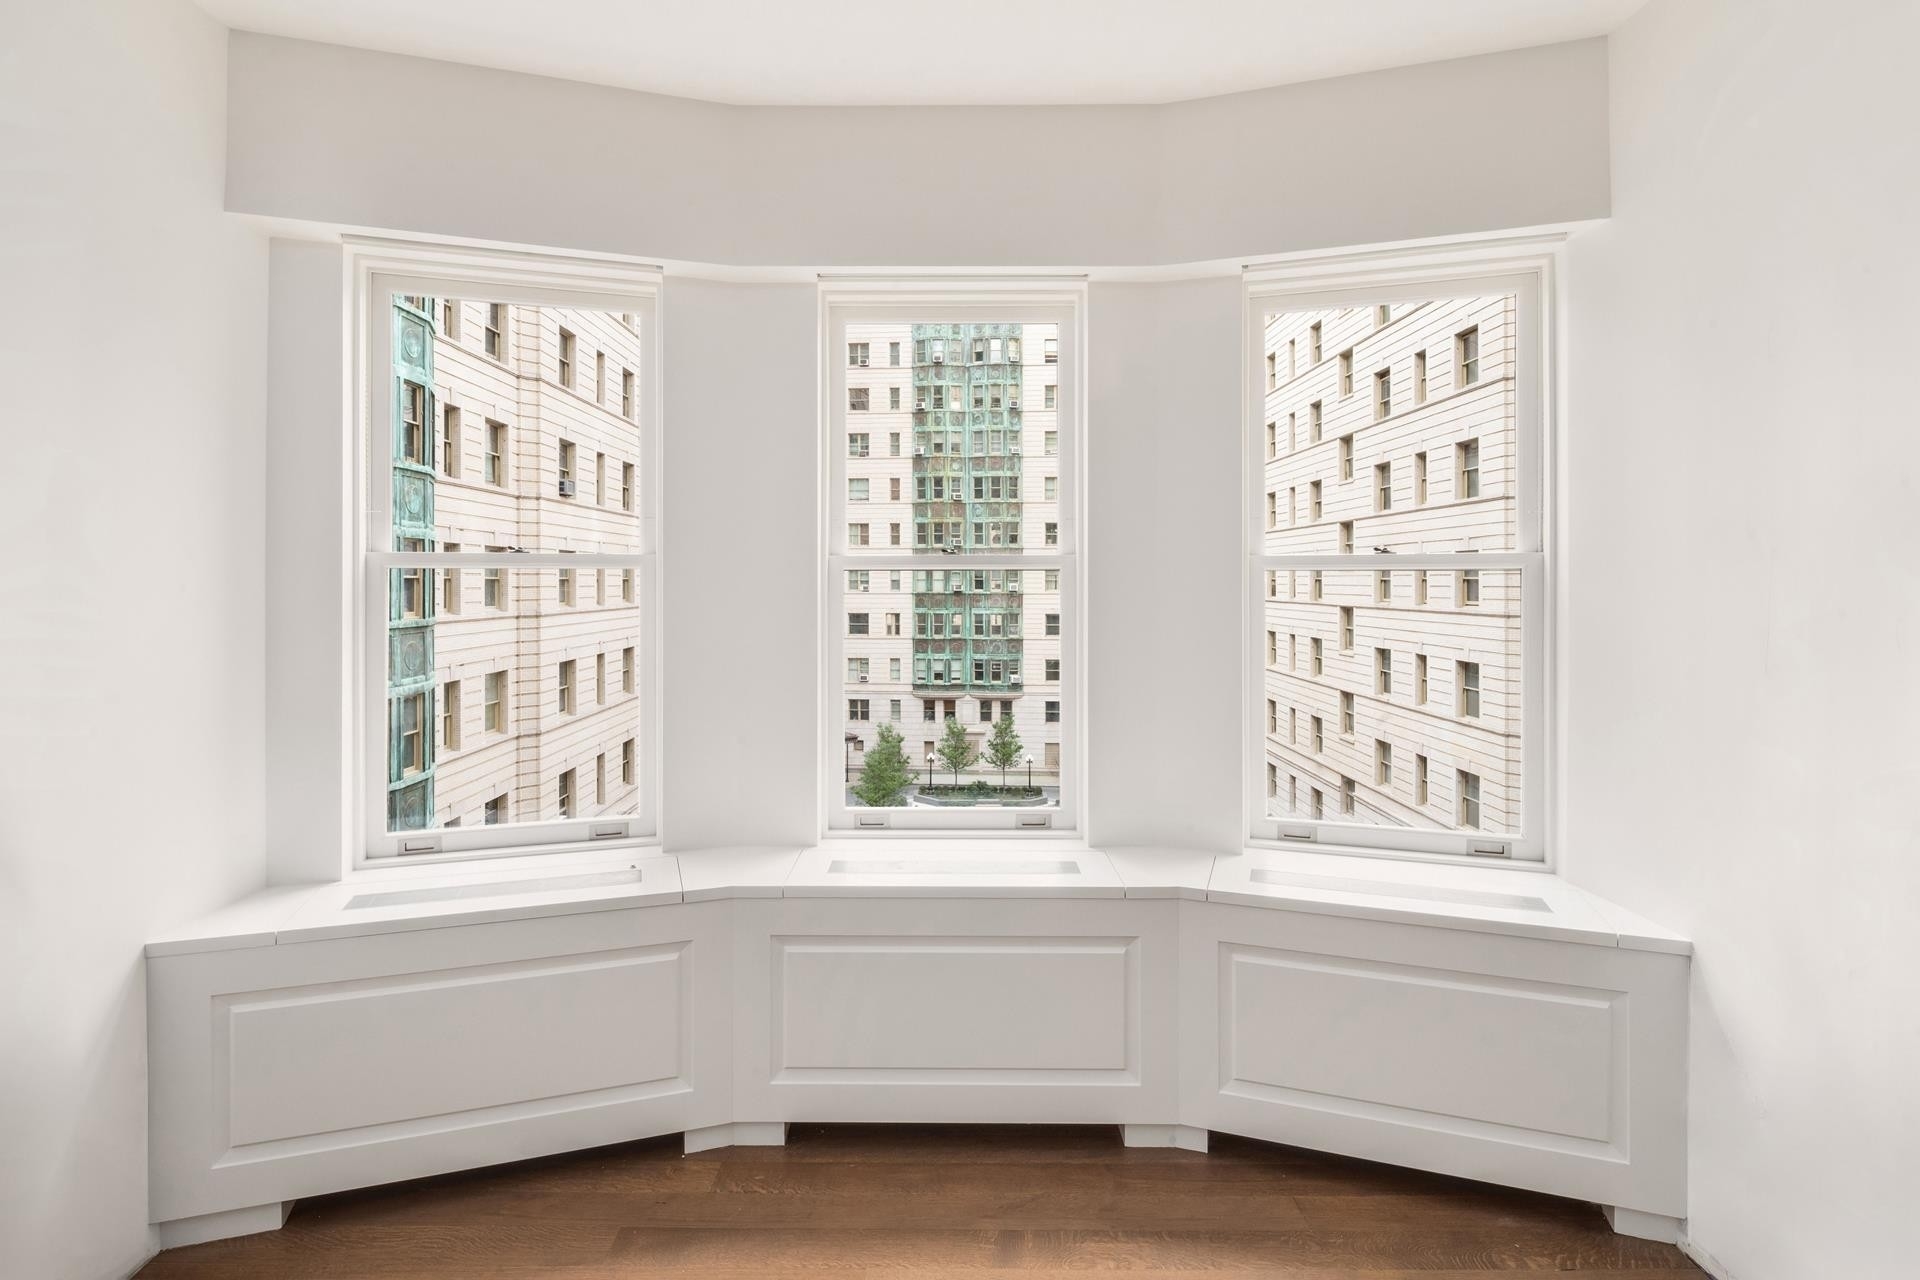 4. Condominiums for Sale at The Belnord, 225 W 86TH ST, 412 Upper West Side, New York, New York 10024